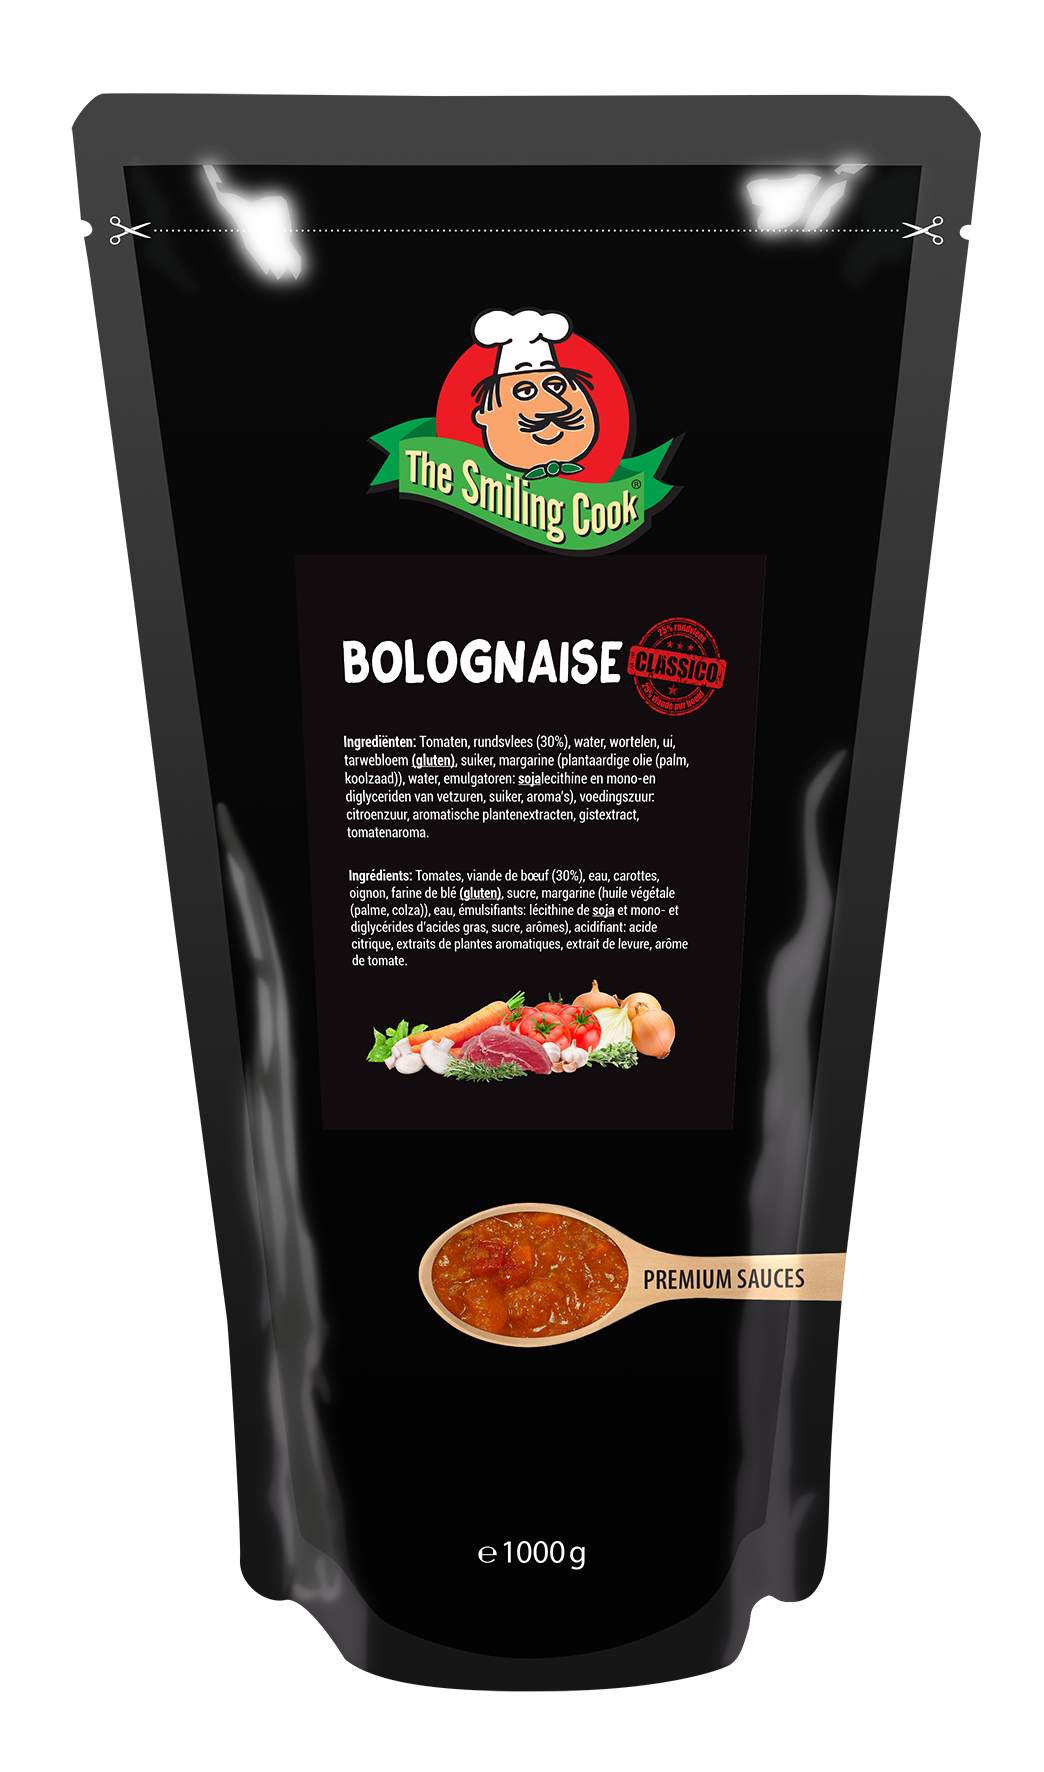 Pasta sauce Bolognese Classico 6x1kg The Smiling Cook